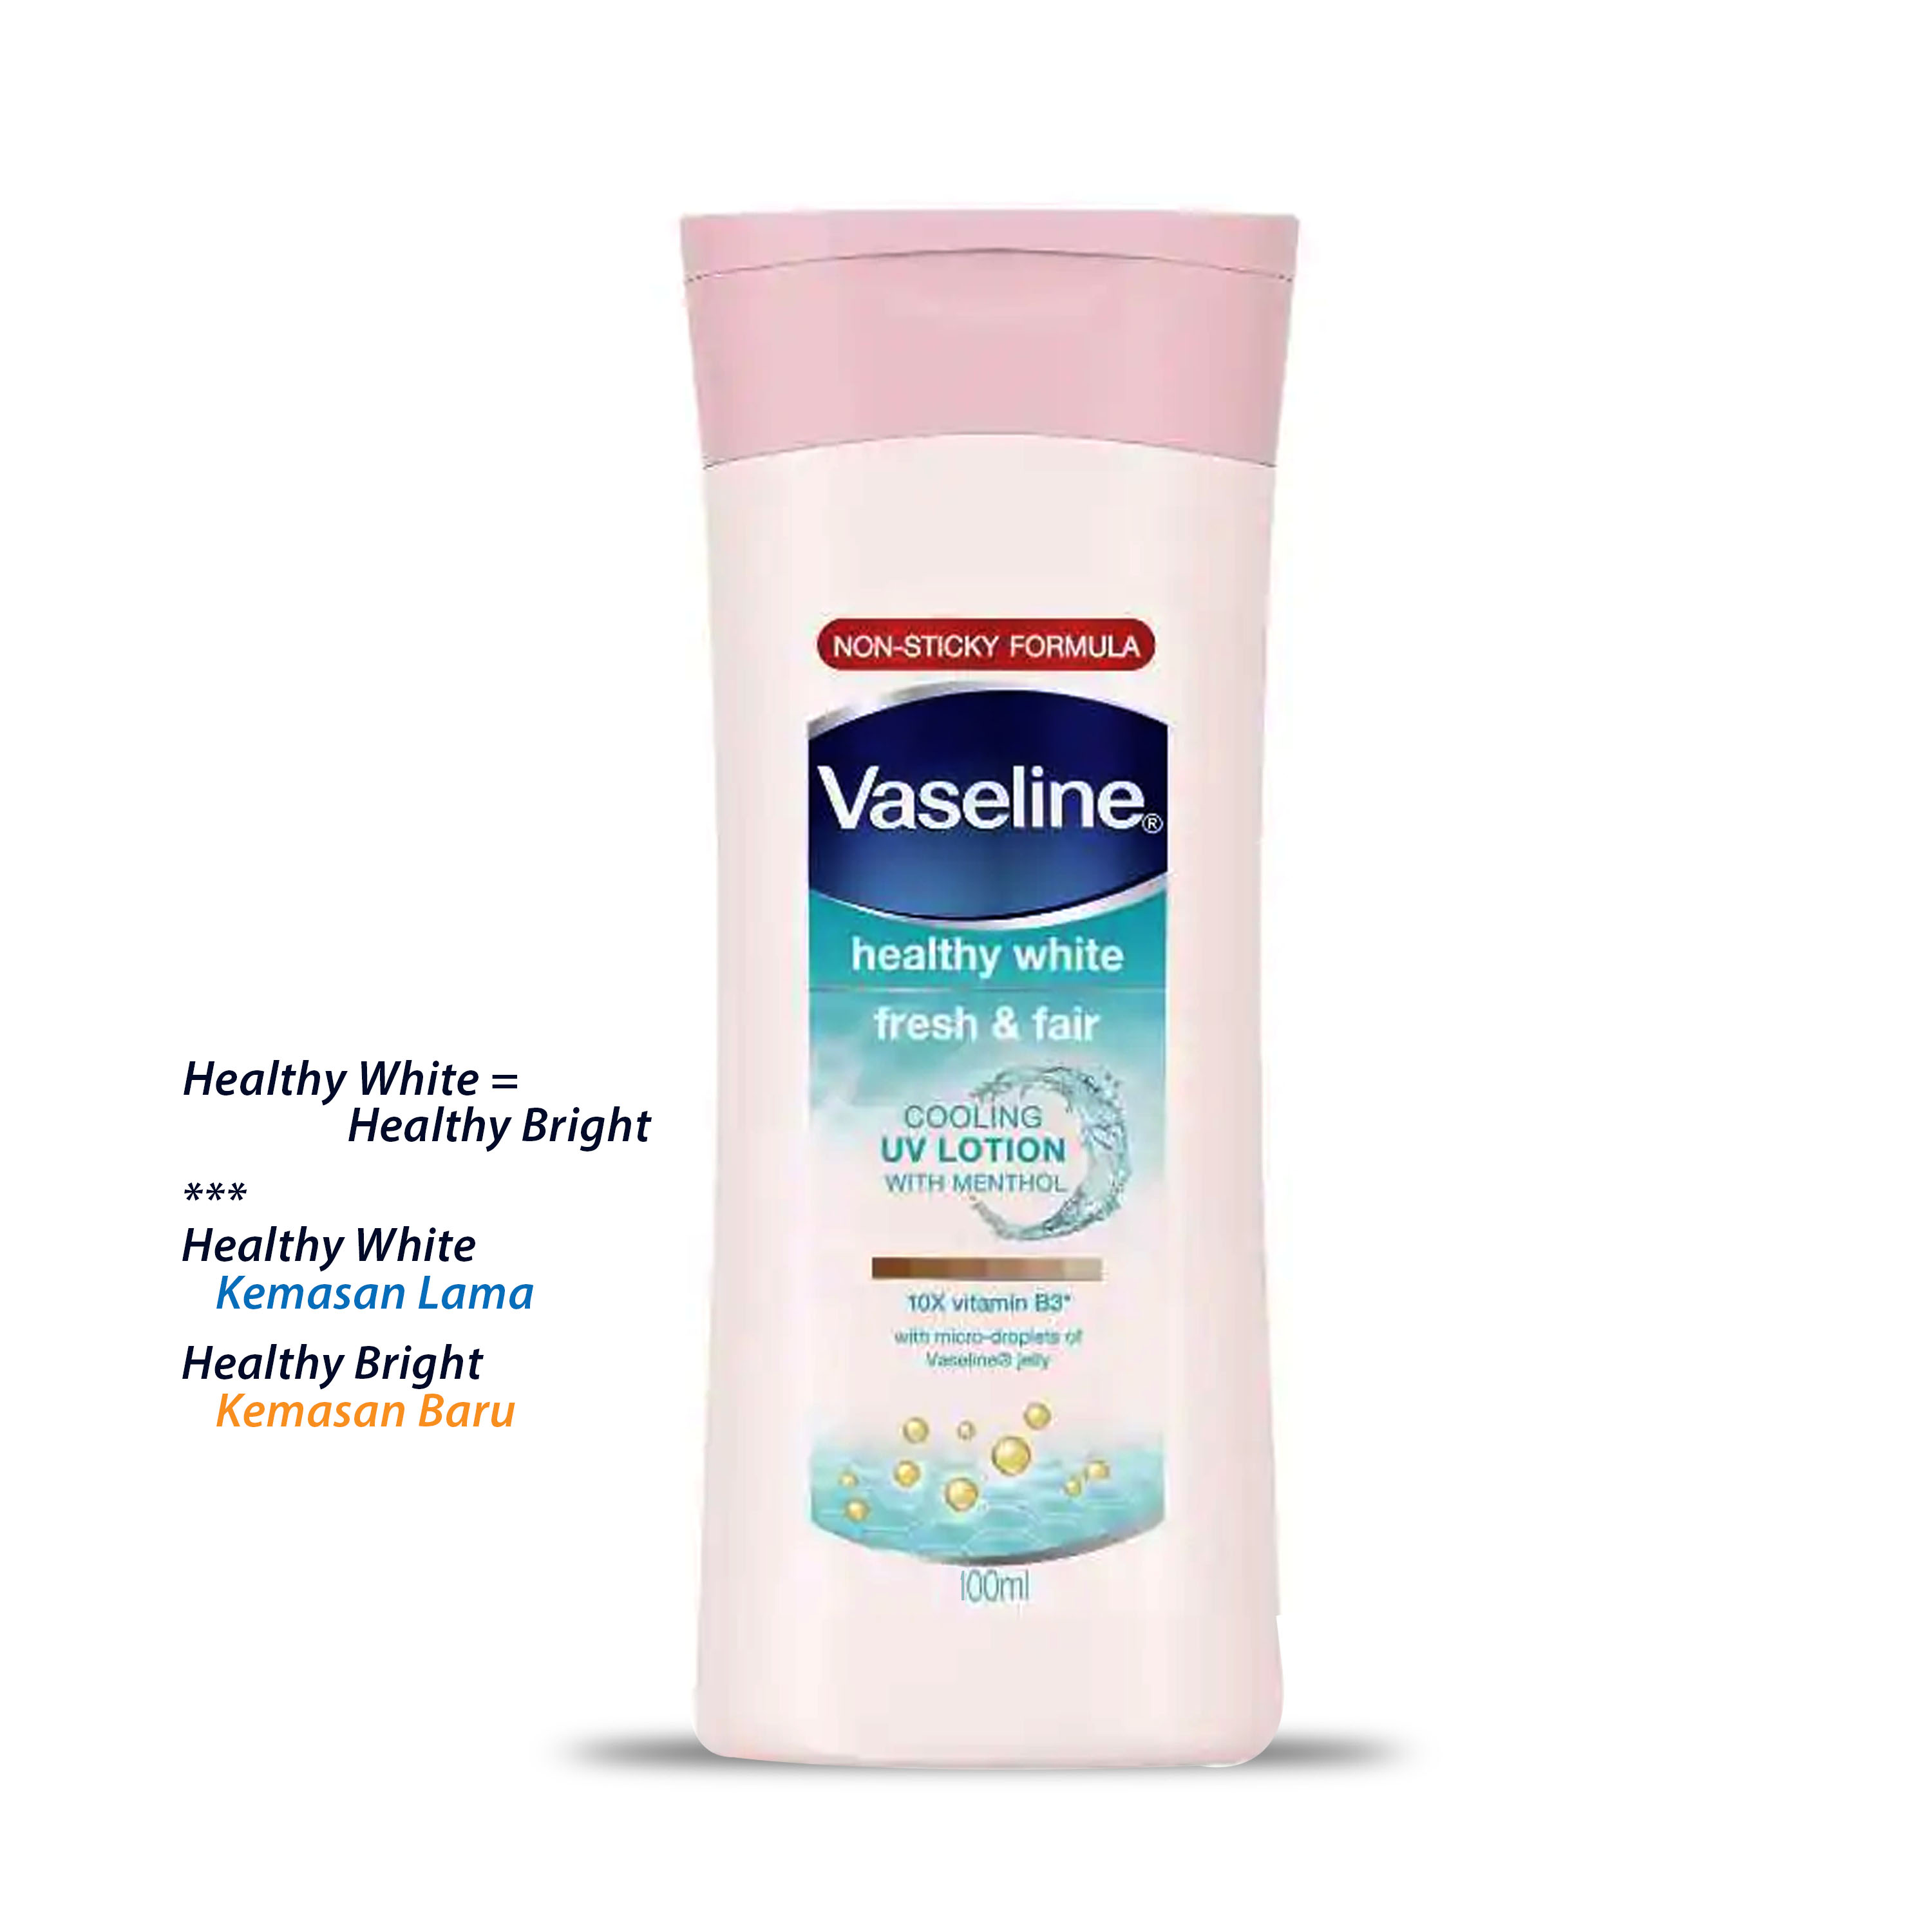 Vaseline Healthy White / Healthy Bright Fresh and Fair Cooling UV Lotion 100 ml / 200 ml- Body Lotion